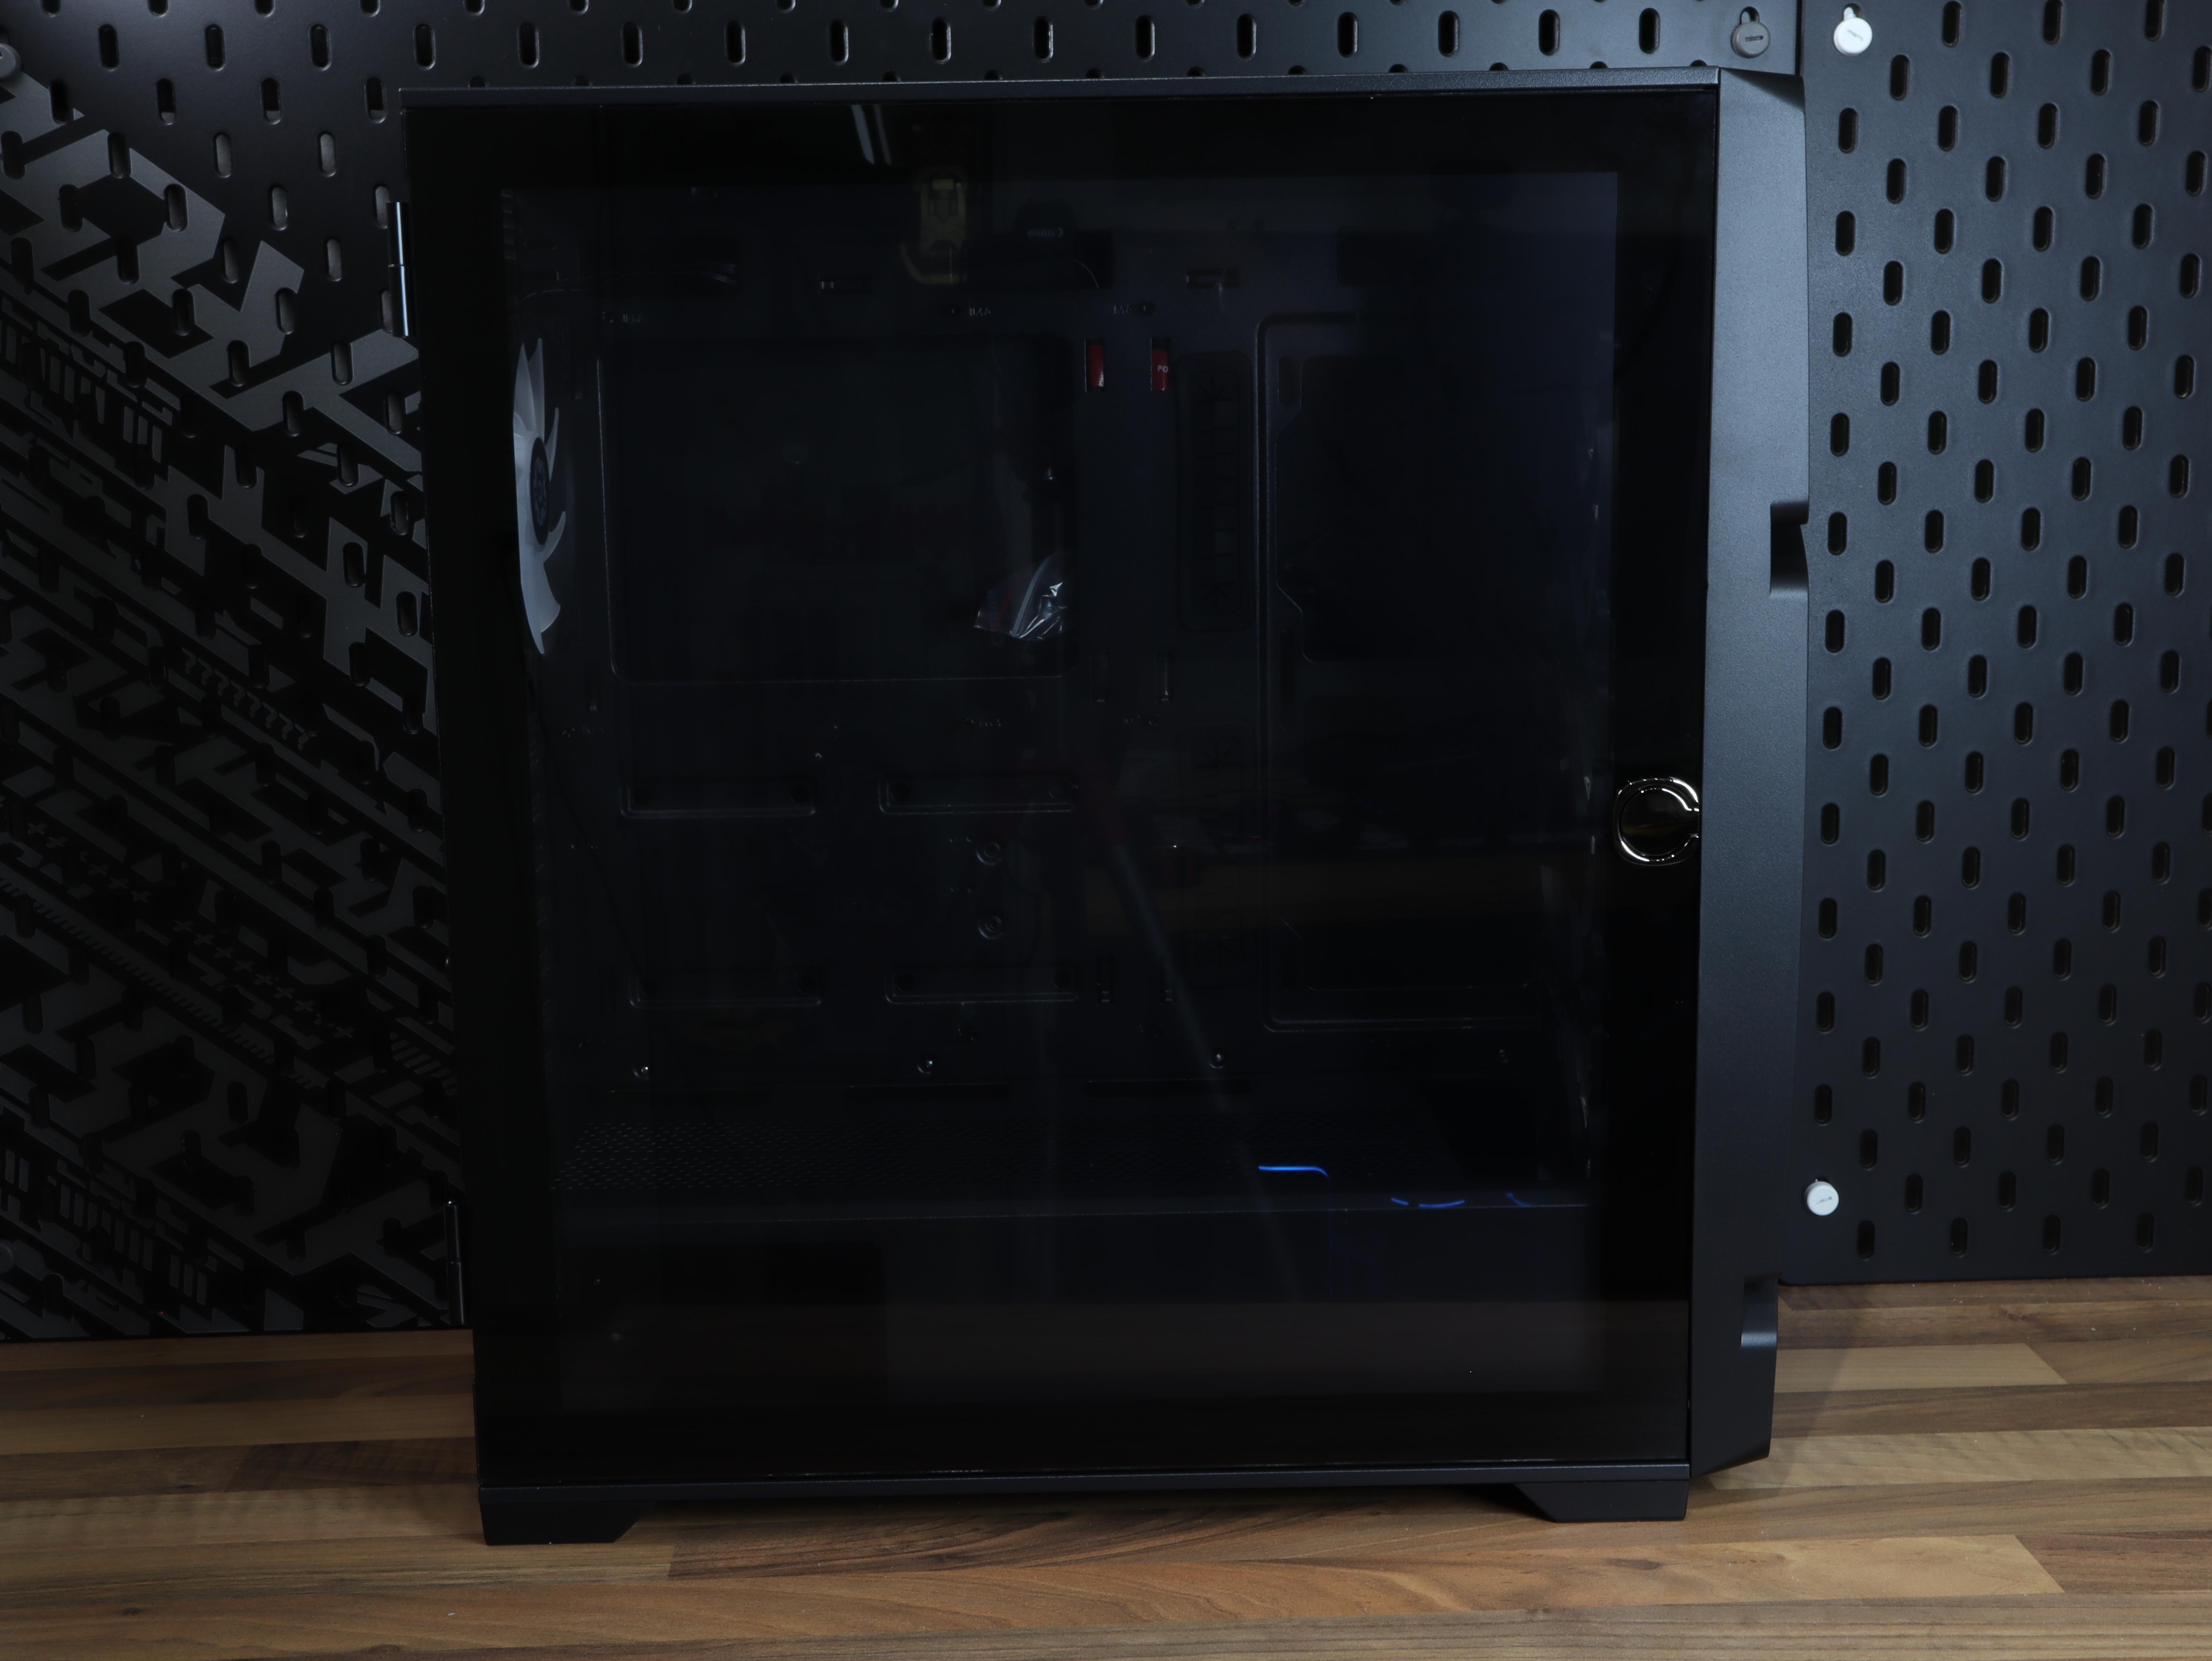 Case 420mm Enermax Tempered ATX Tempered glass MS31 Glass PC RGB MarbleShell Mid-Tower.JPG